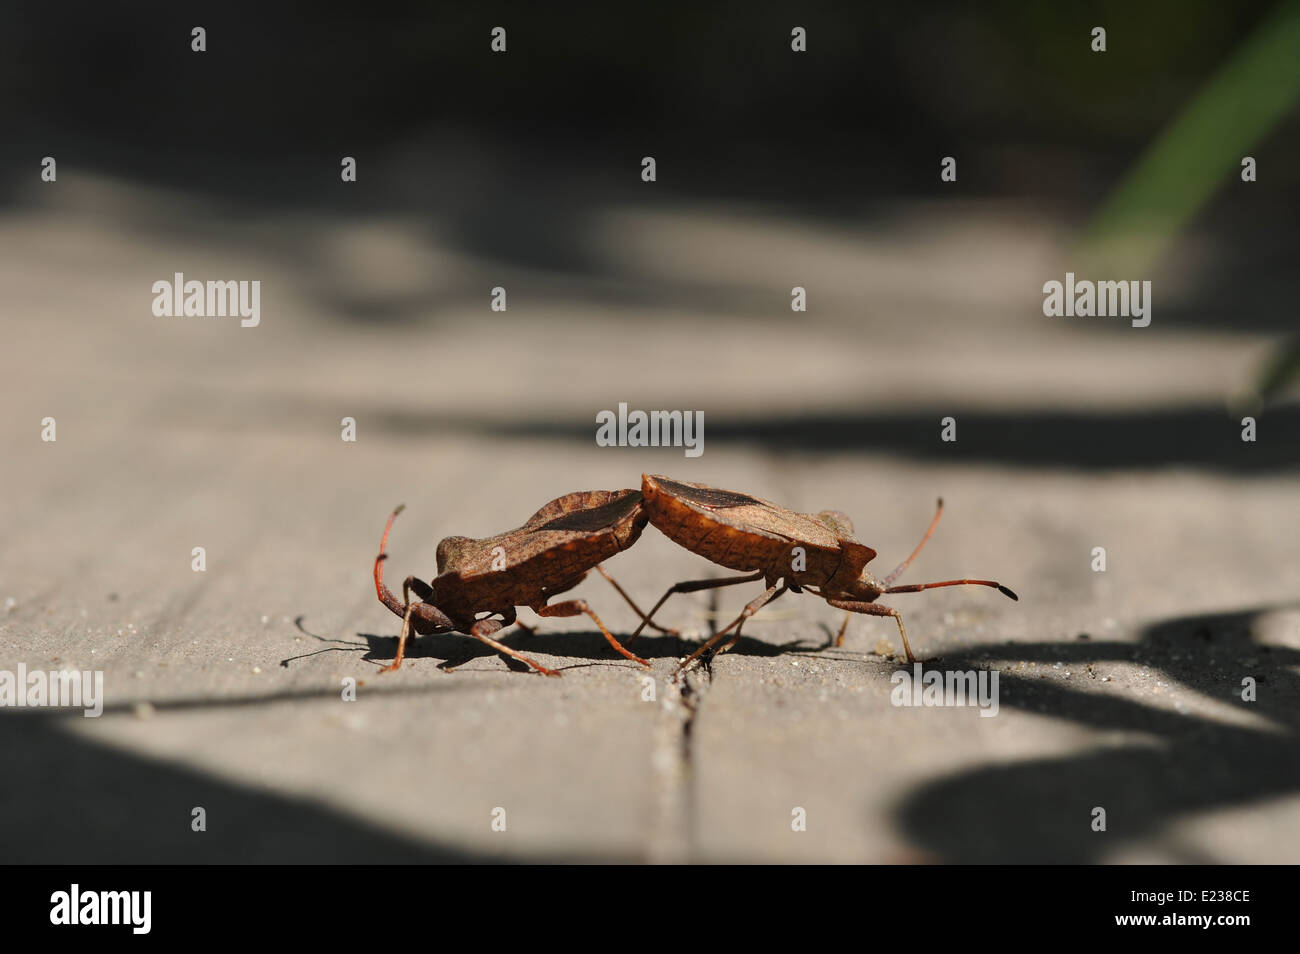 pairing bugs. abstract two wrestlers in the battle. Stock Photo